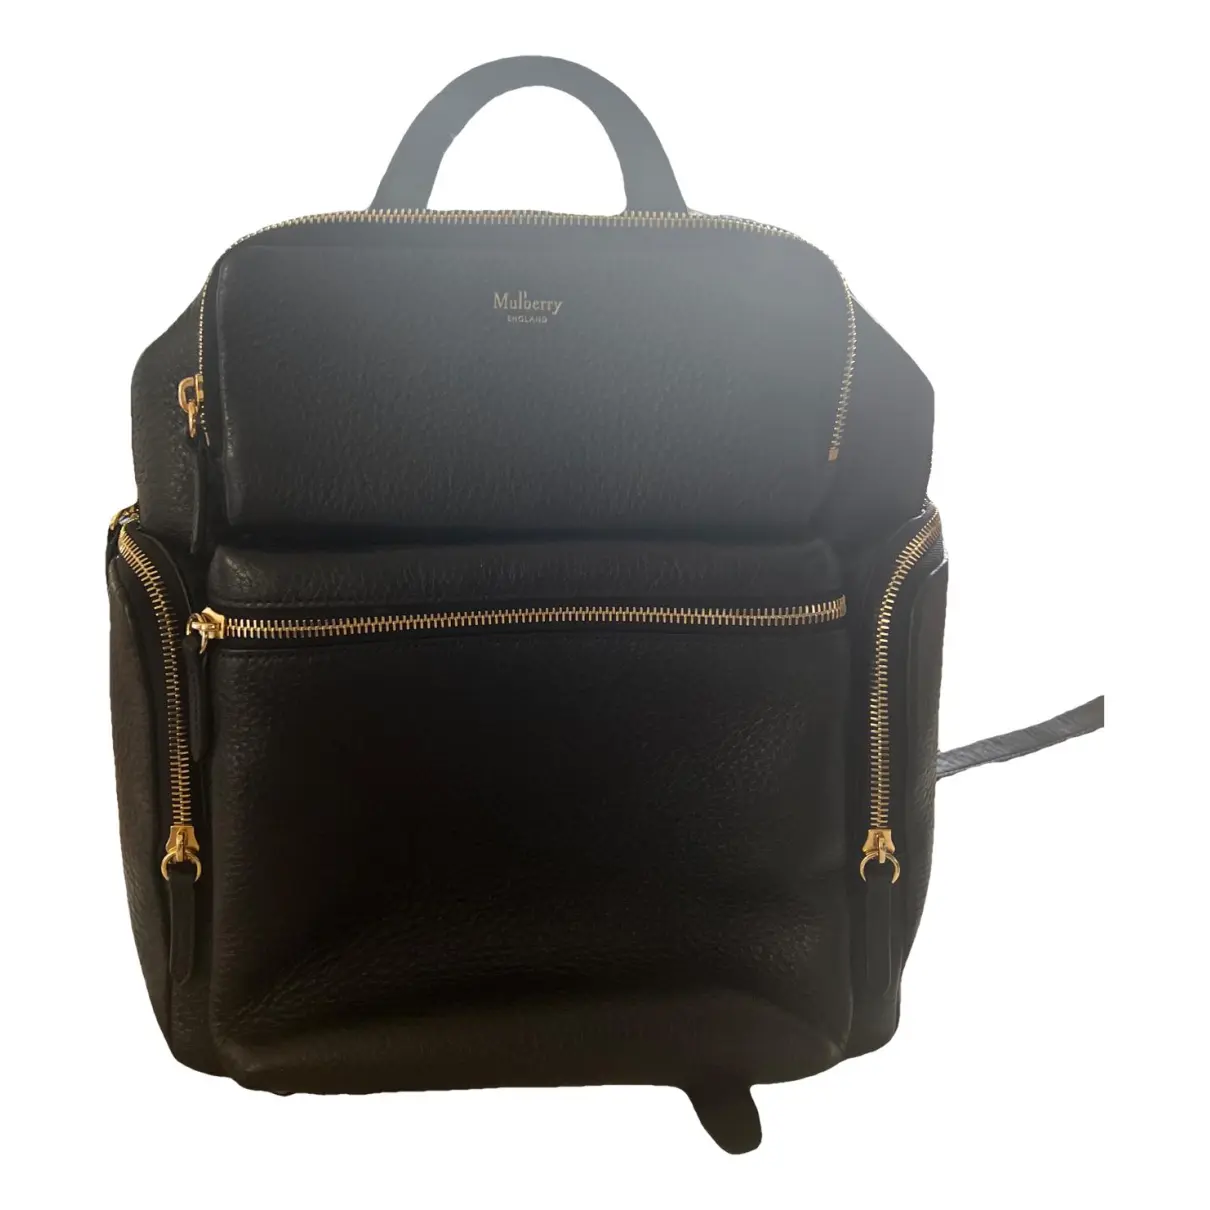 Zipped Backpack leather backpack Mulberry